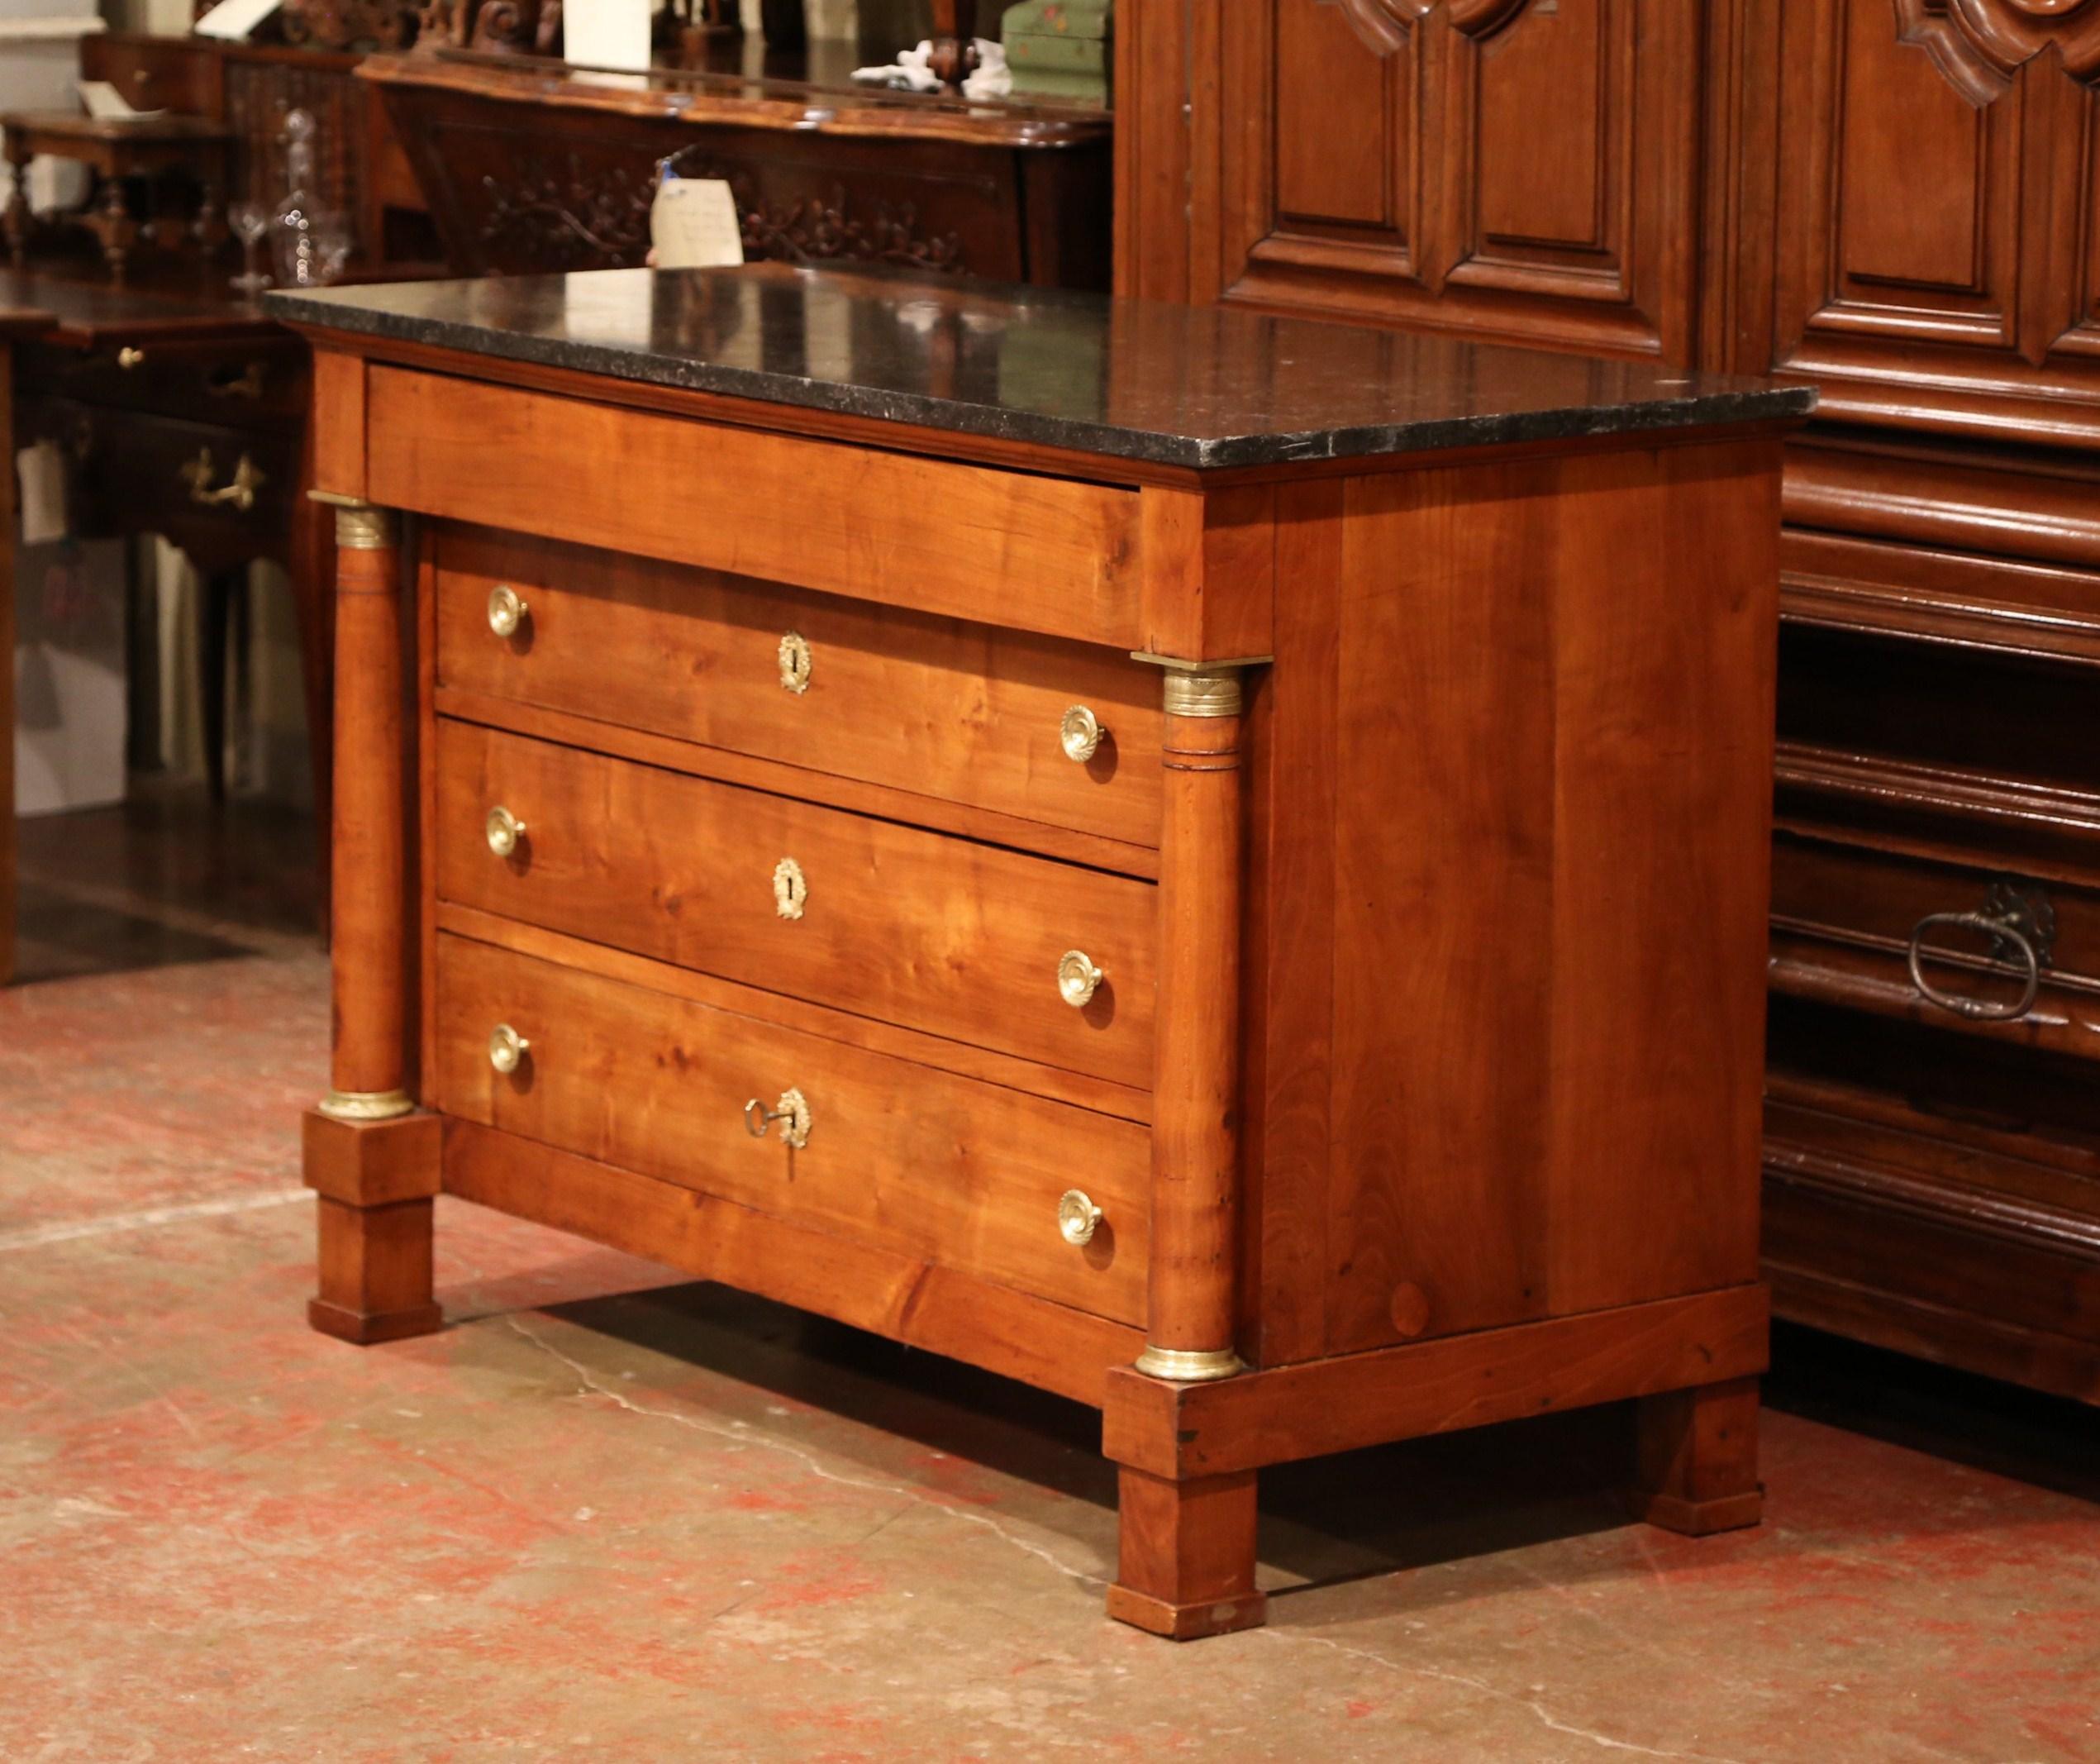 This elegant fruitwood chest of drawers was crafted in France, circa 1860. The traditional antique commode features three drawers across the front with original bronze pulls and decorative key holes escutcheons, and a fourth additional drawer under